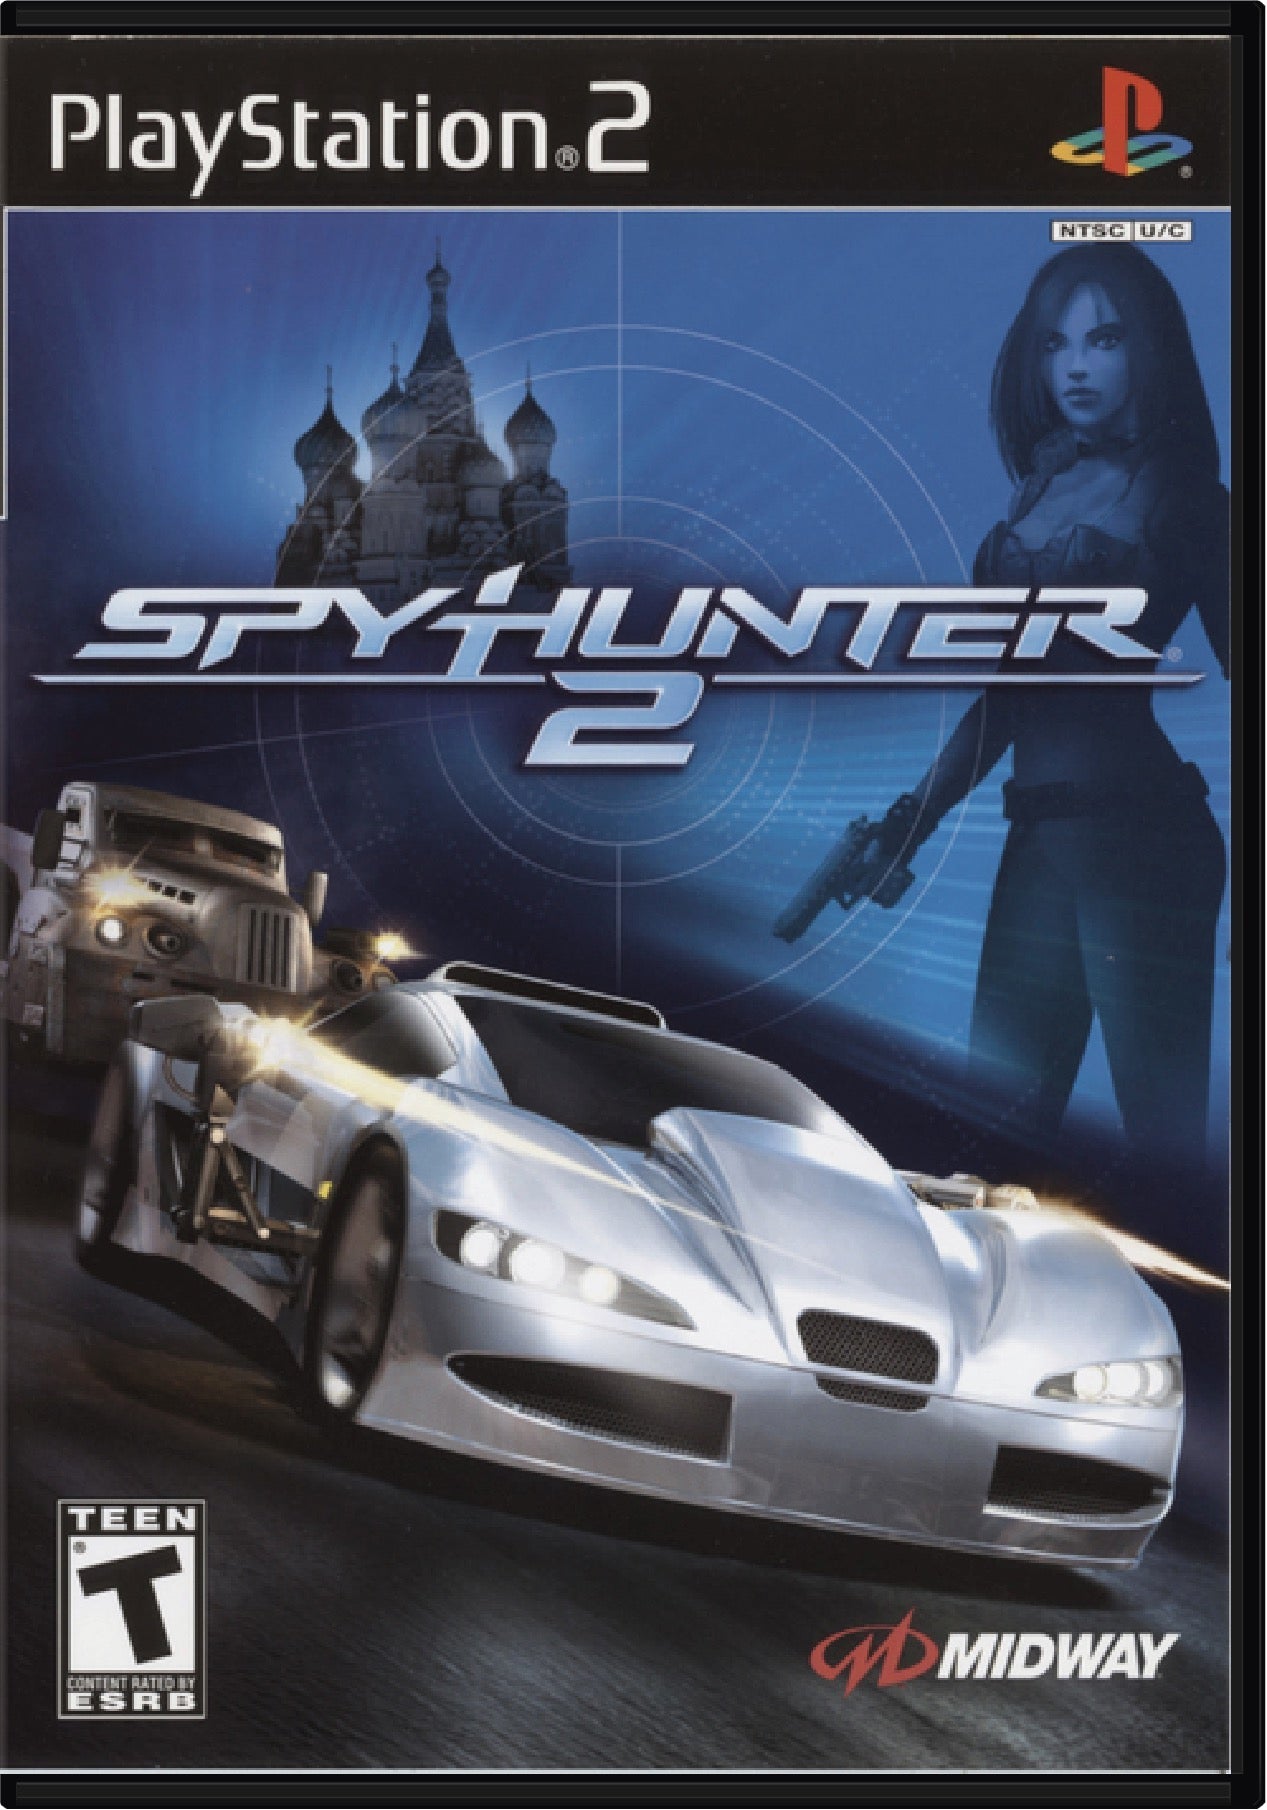 Spy Hunter 2 Cover Art and Product Photo